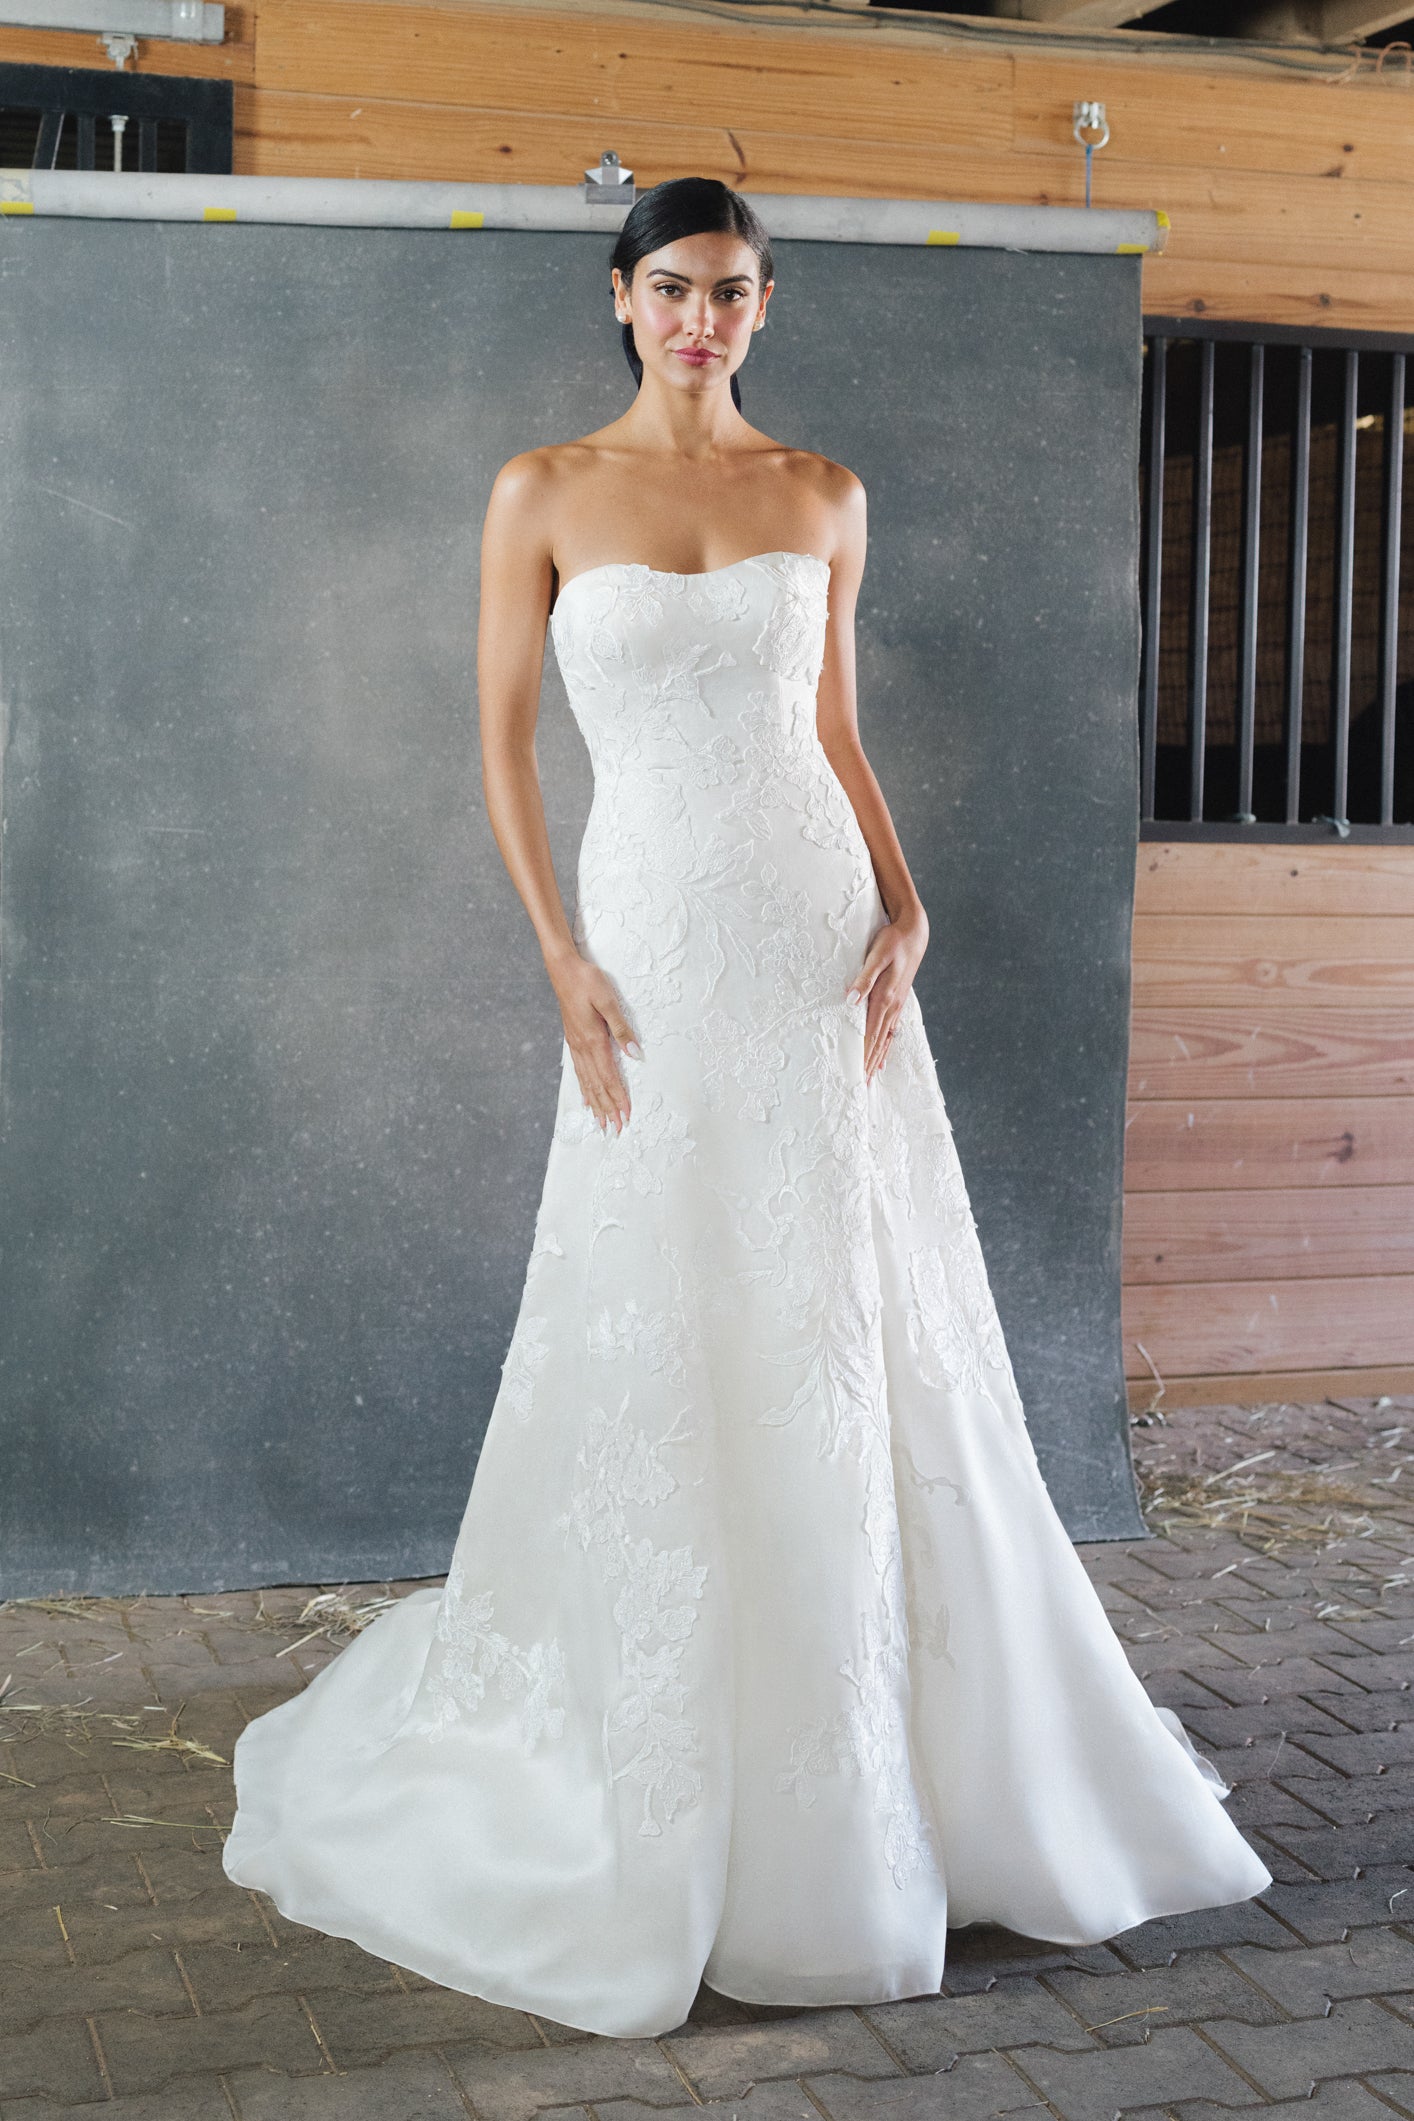 Romantic Sweetheart Strapless Gown by Anne Barge - Image 1